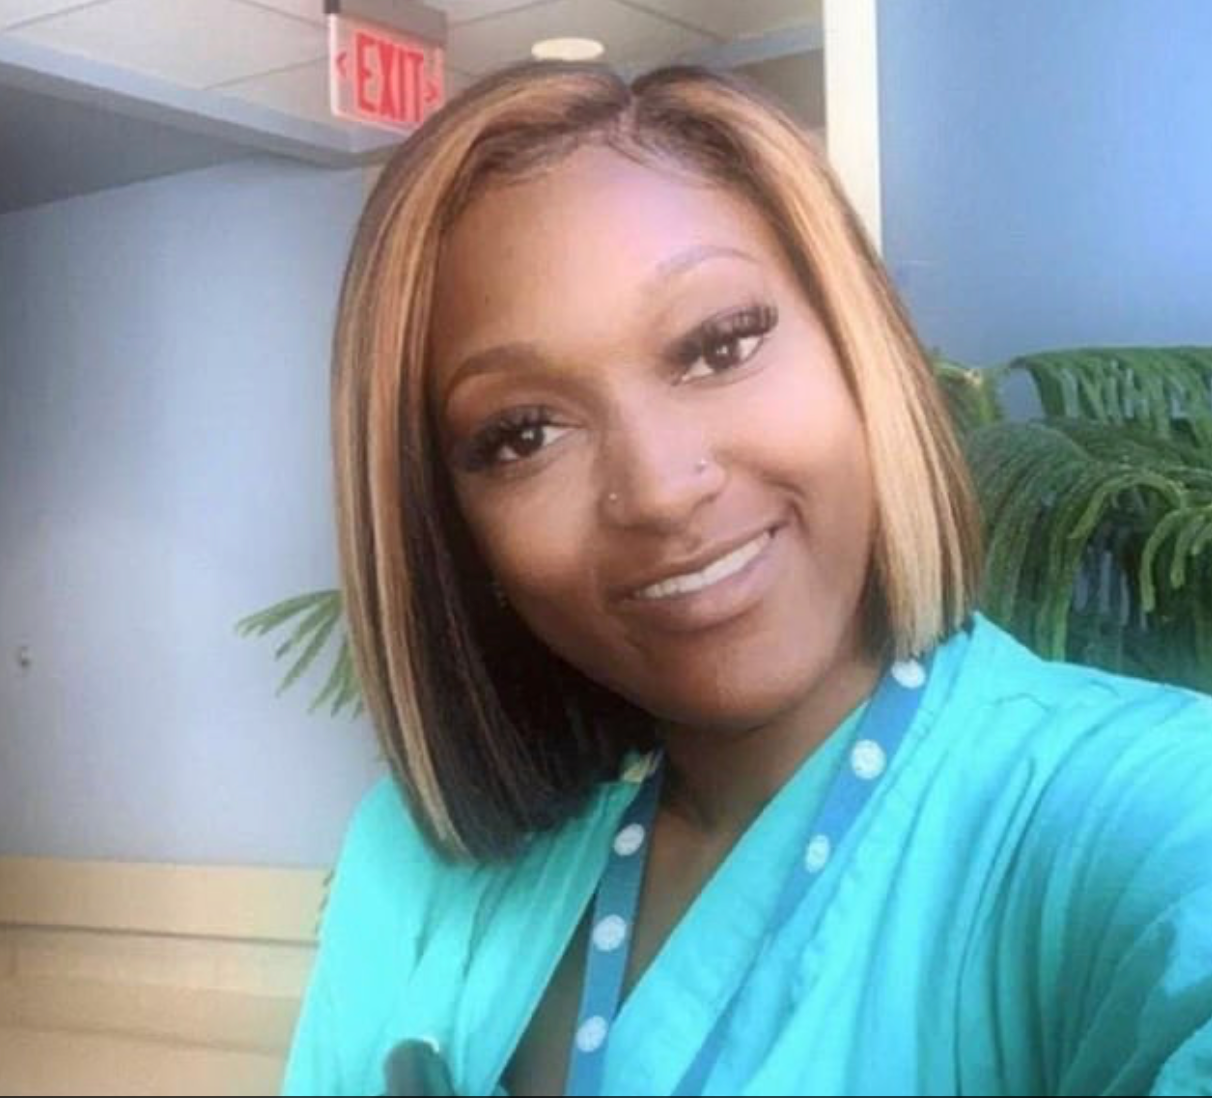 Shanquella Robinson was a beloved daughter and sister who ran a hair braiding and beauty business in her hometown of Charlotte, North Carolina